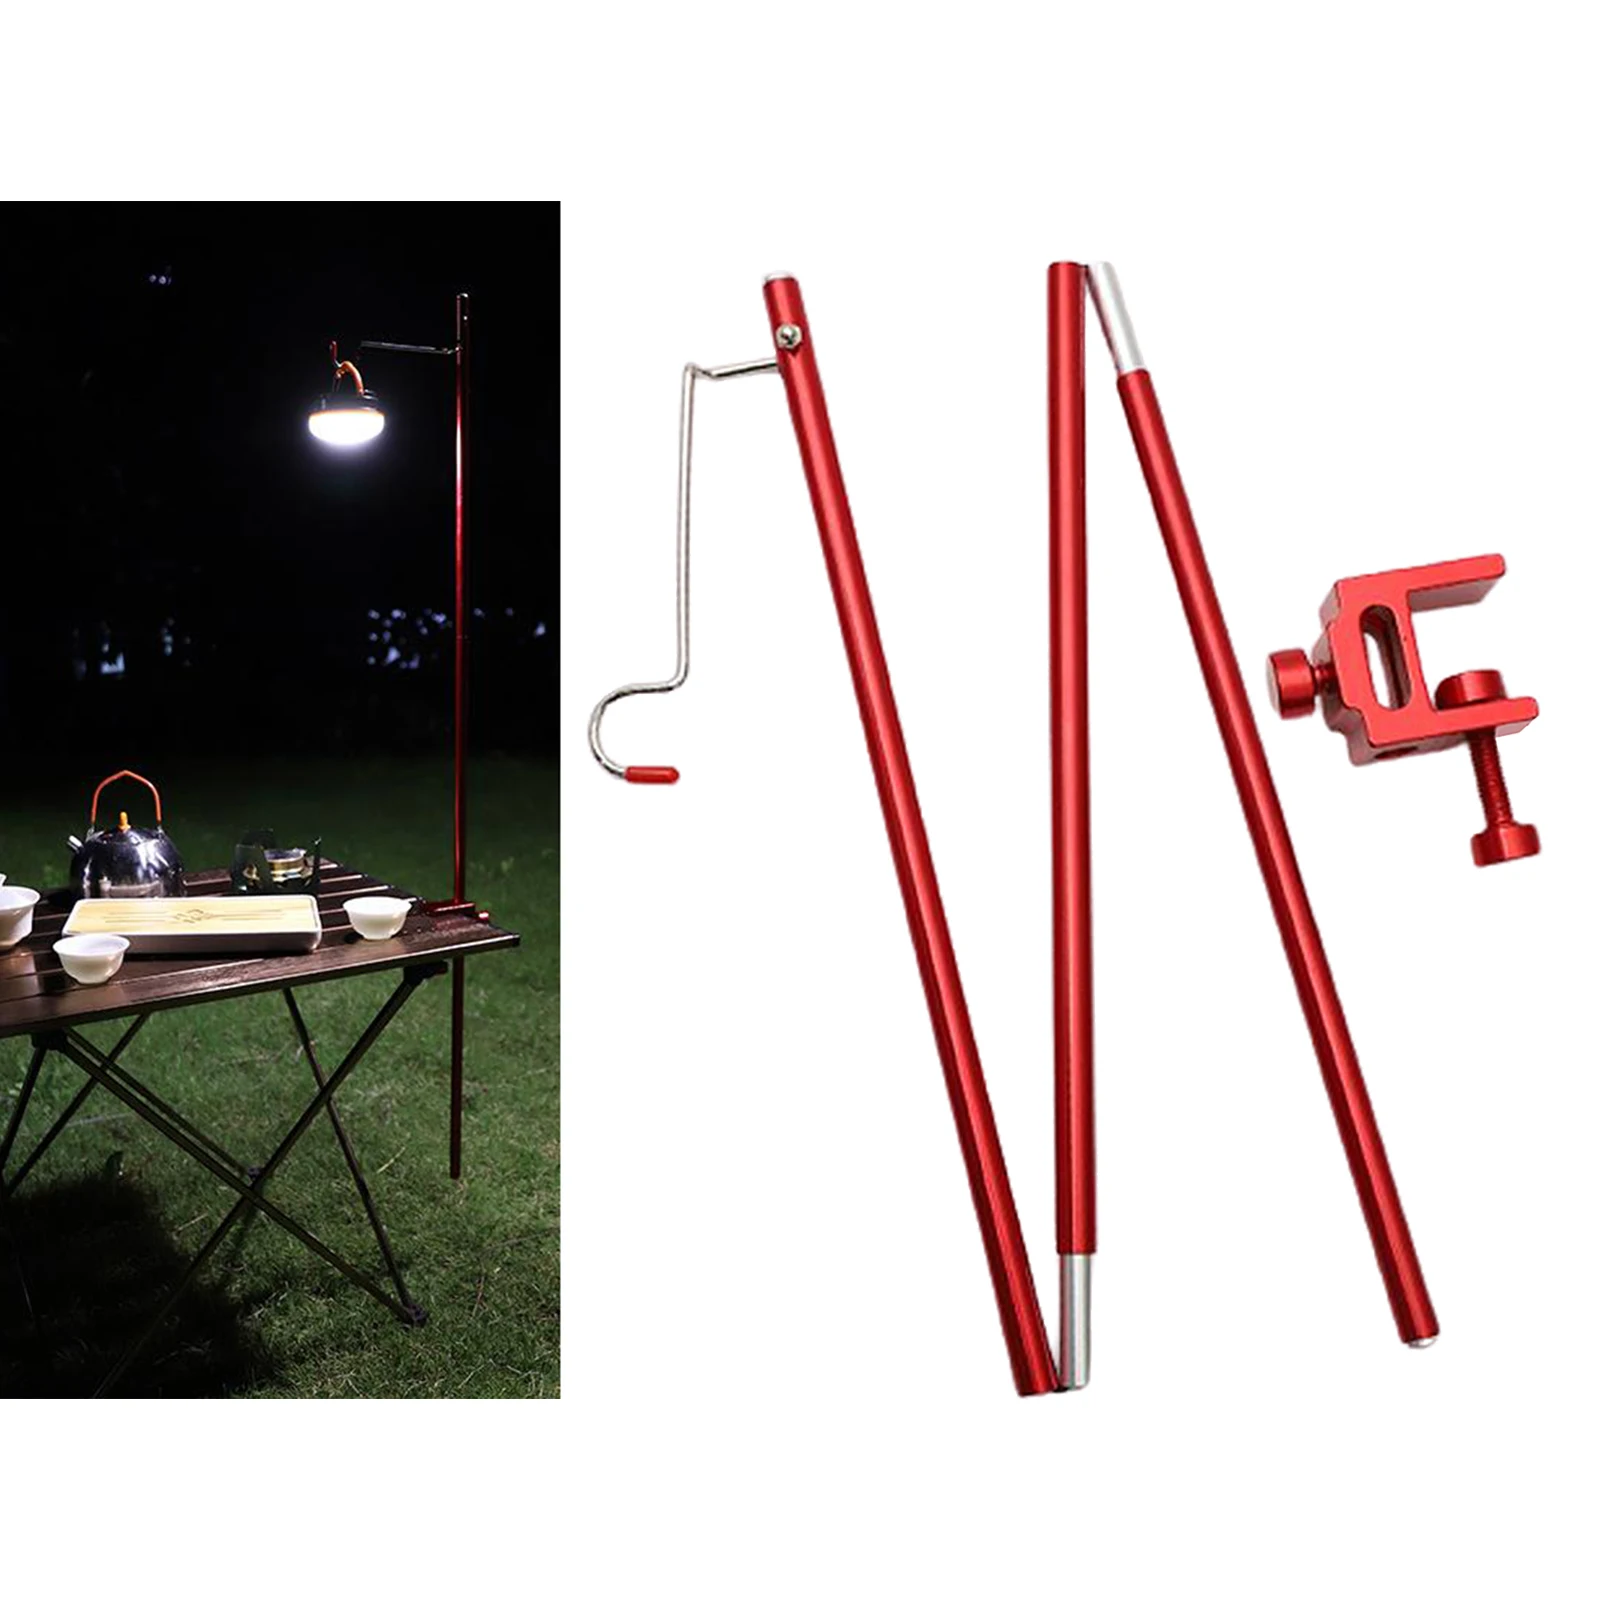 Garden Camping Tent Light Support Rod & Table Clip Holder for Hiking Fishing